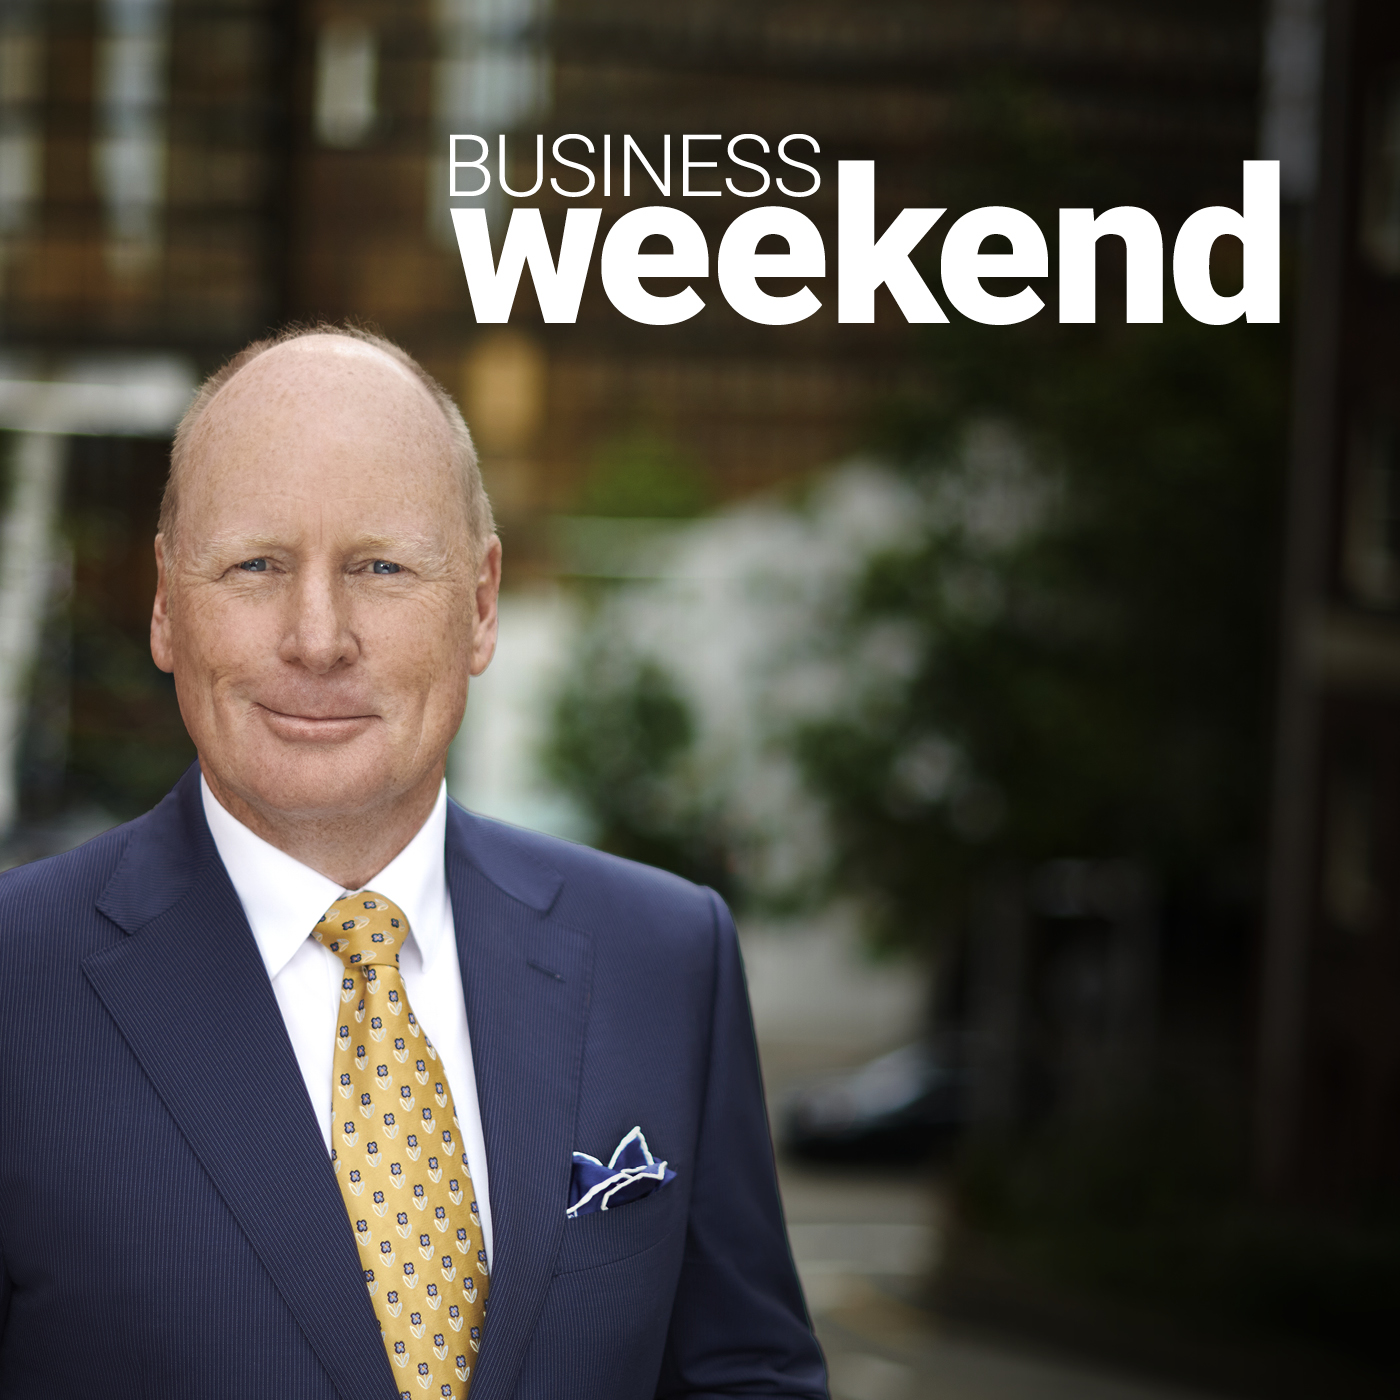 Business Weekend, Sunday 19th September